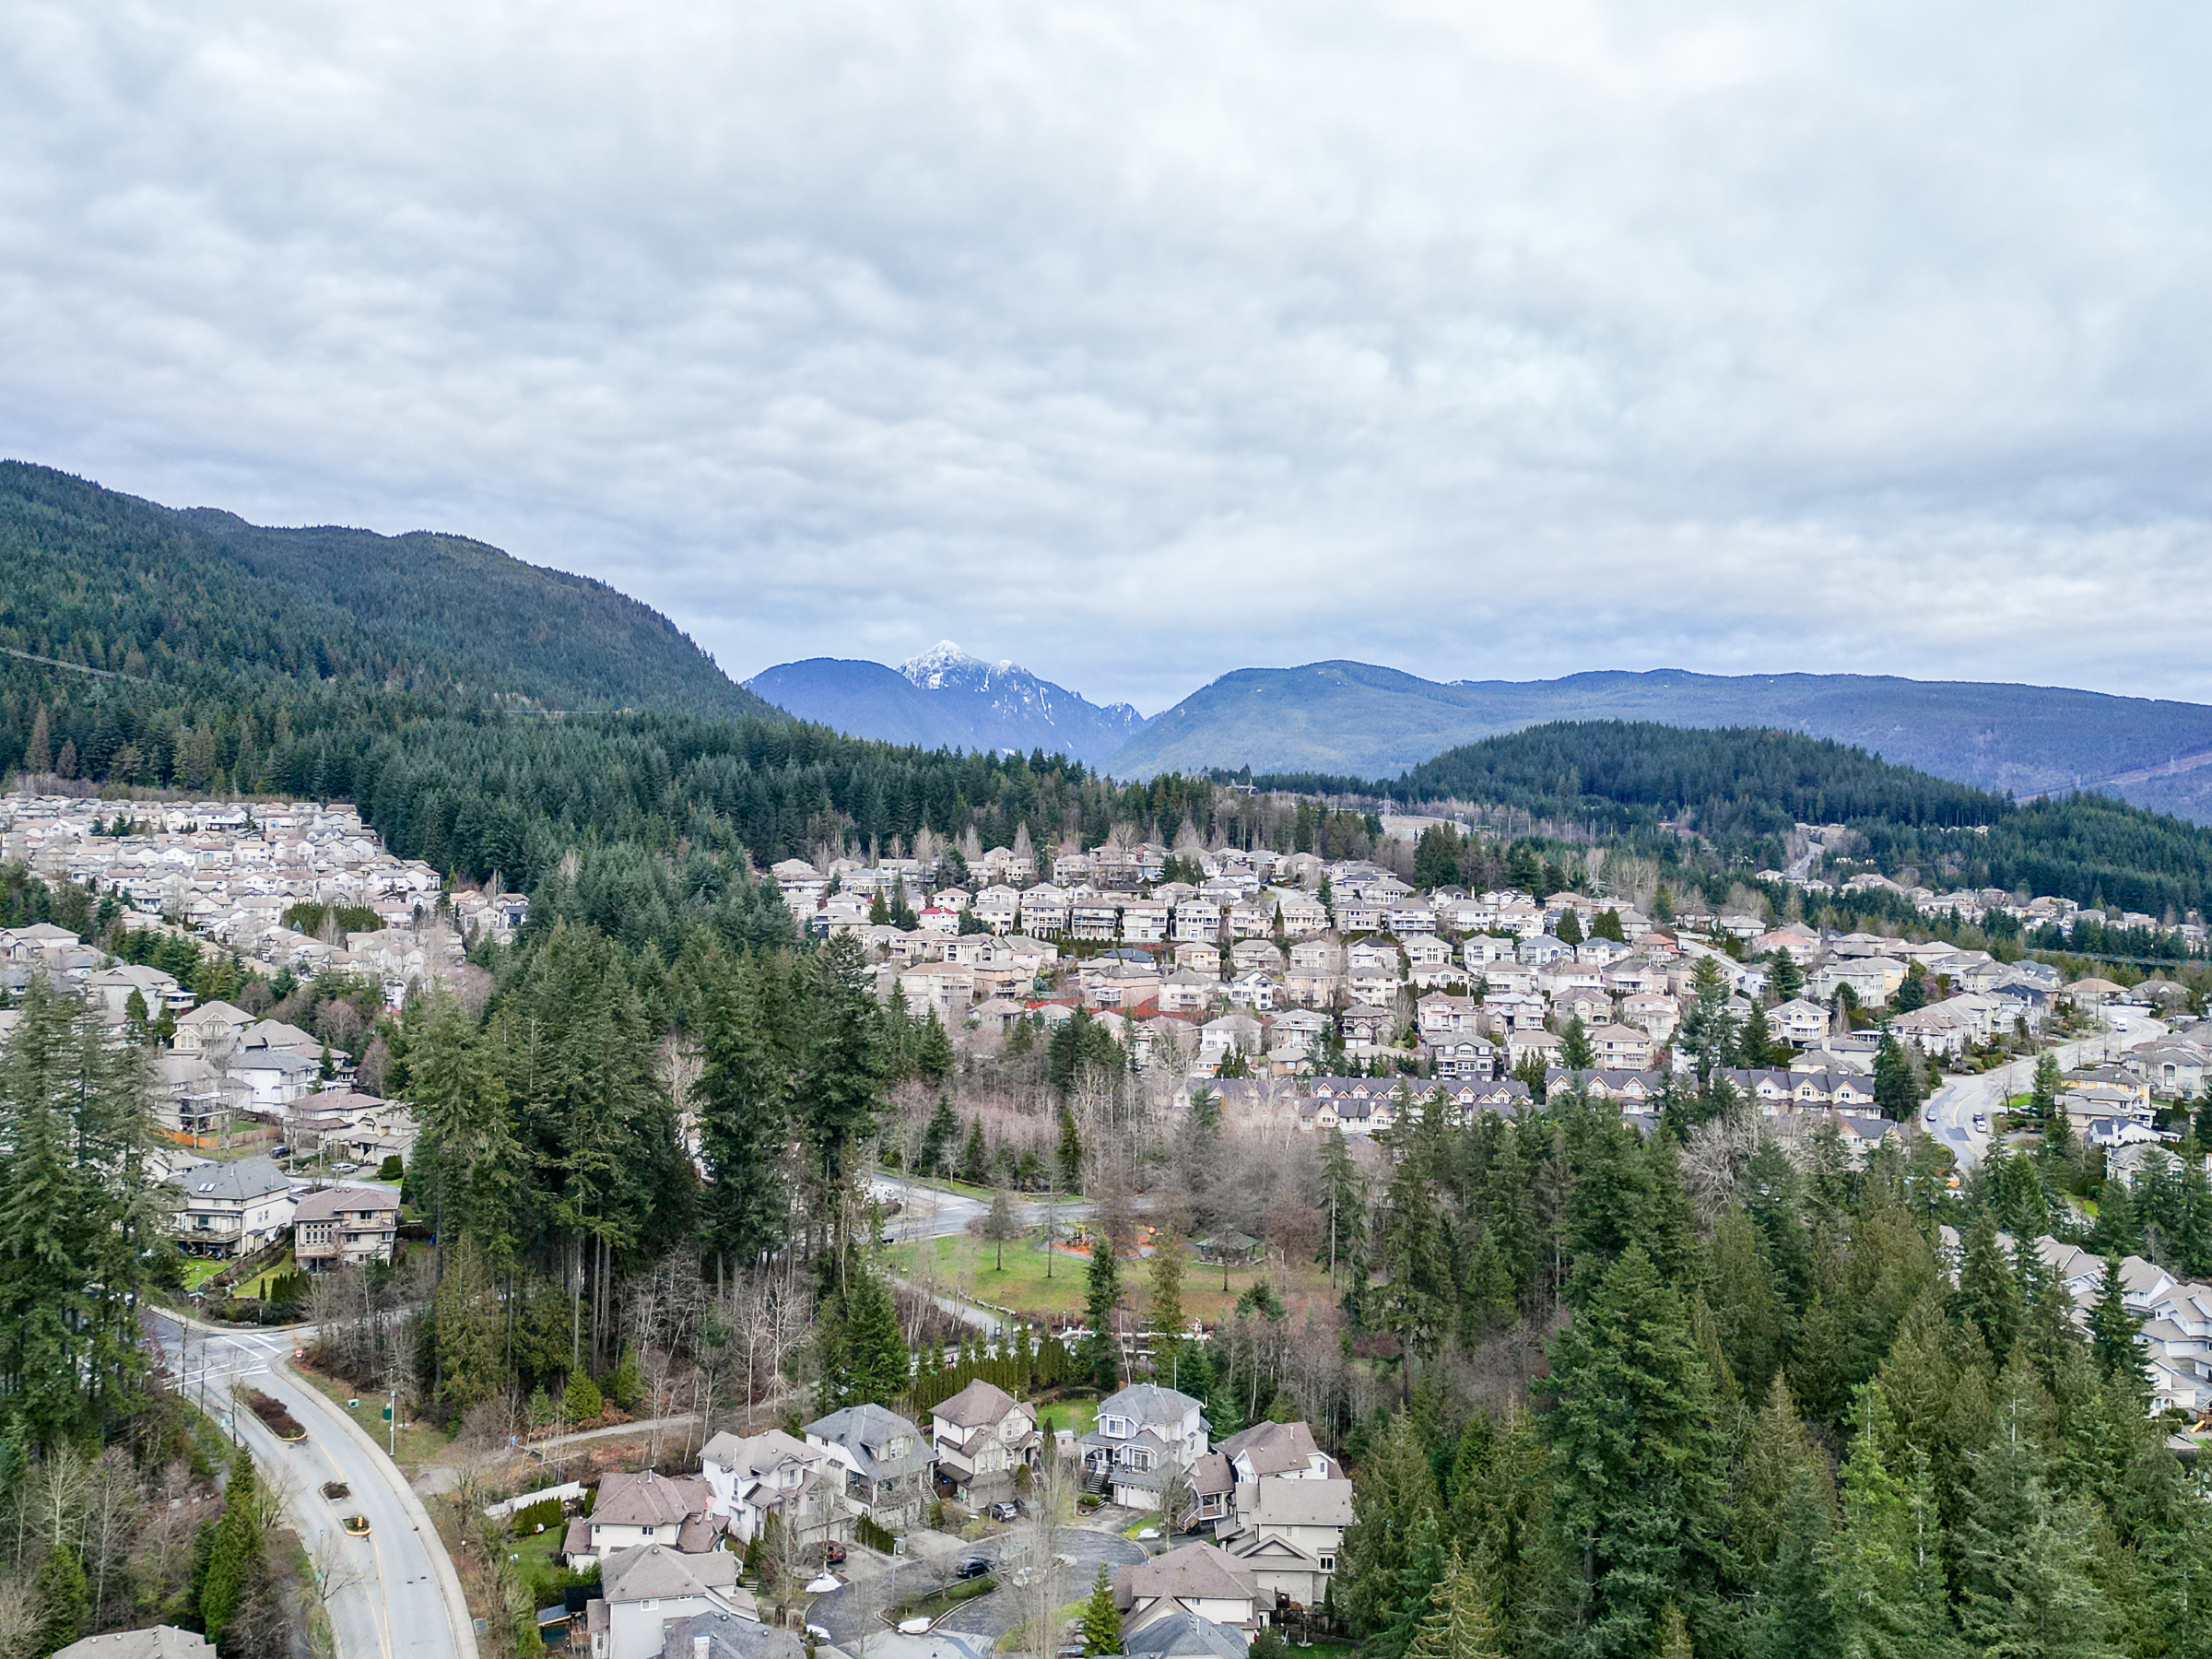 Living in Port Moody 521 Forest Park Way Port Moody drone Heritage Woods